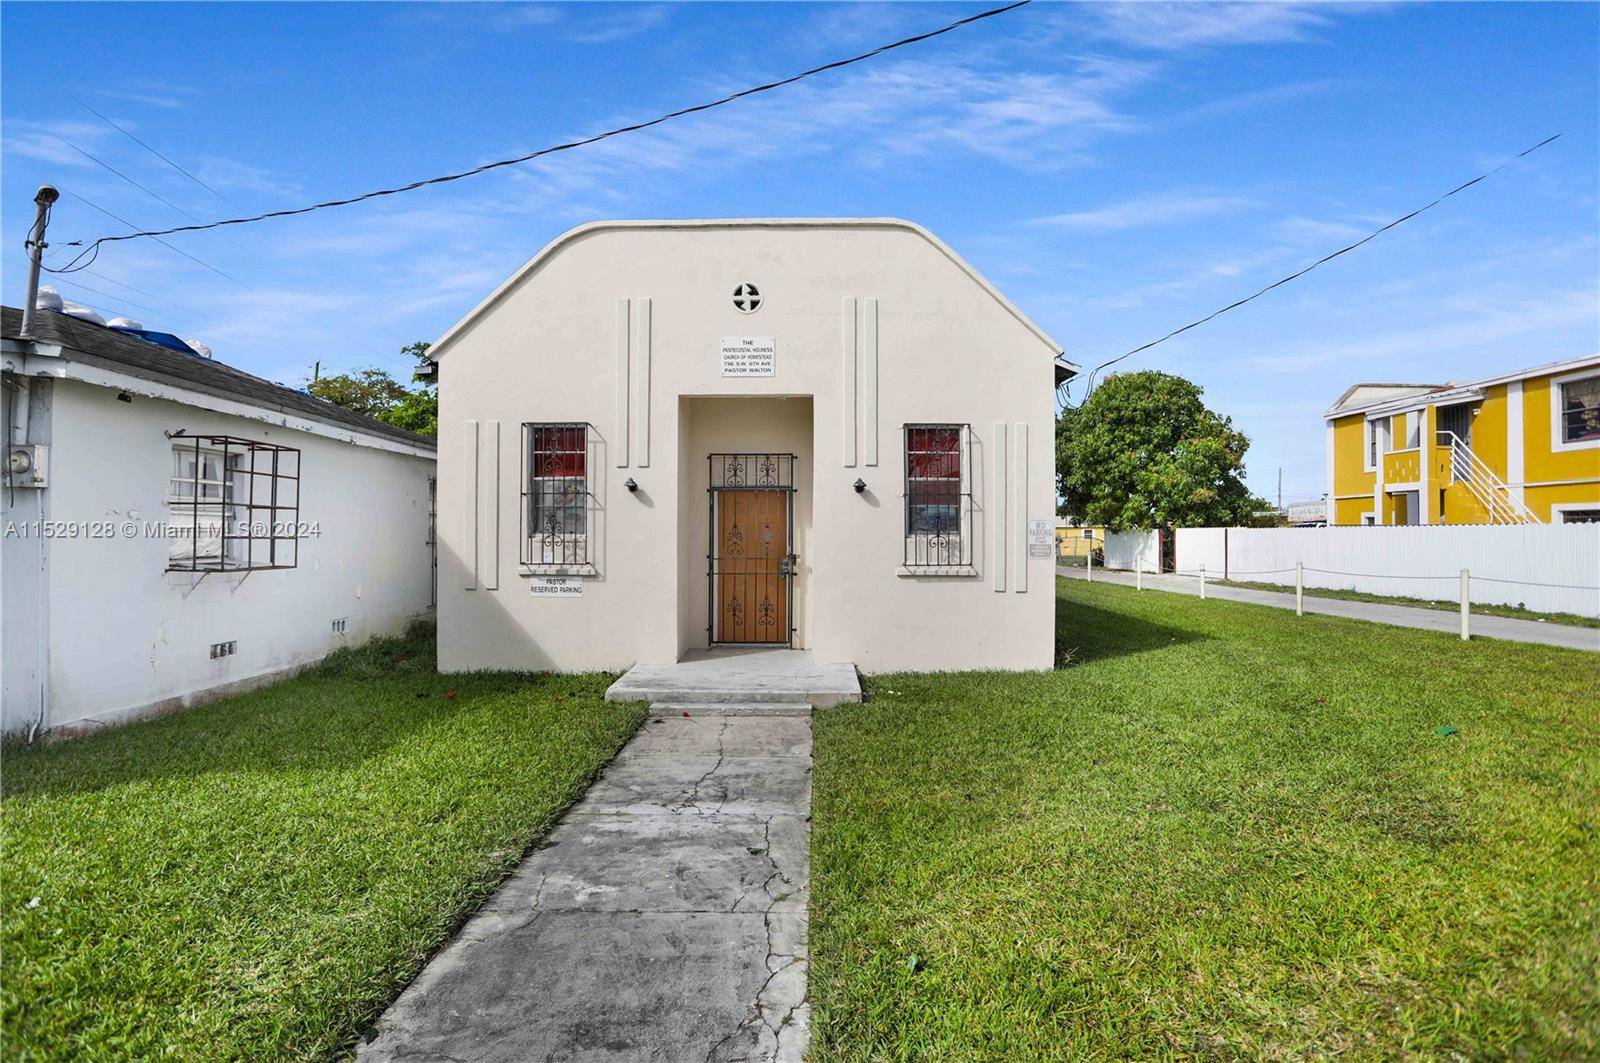 EXCELLENT CORNER OPPORTUNITY FOR INVESTORS SINCE THEY CAN USE THESE 2 PROPERTIES AS RESIDENTIAL OR COMMERCIAL, DIFFERENT USE OR PURPOSE BUYER COULD CONSIDER IT FOR A MULTIFAMILY.